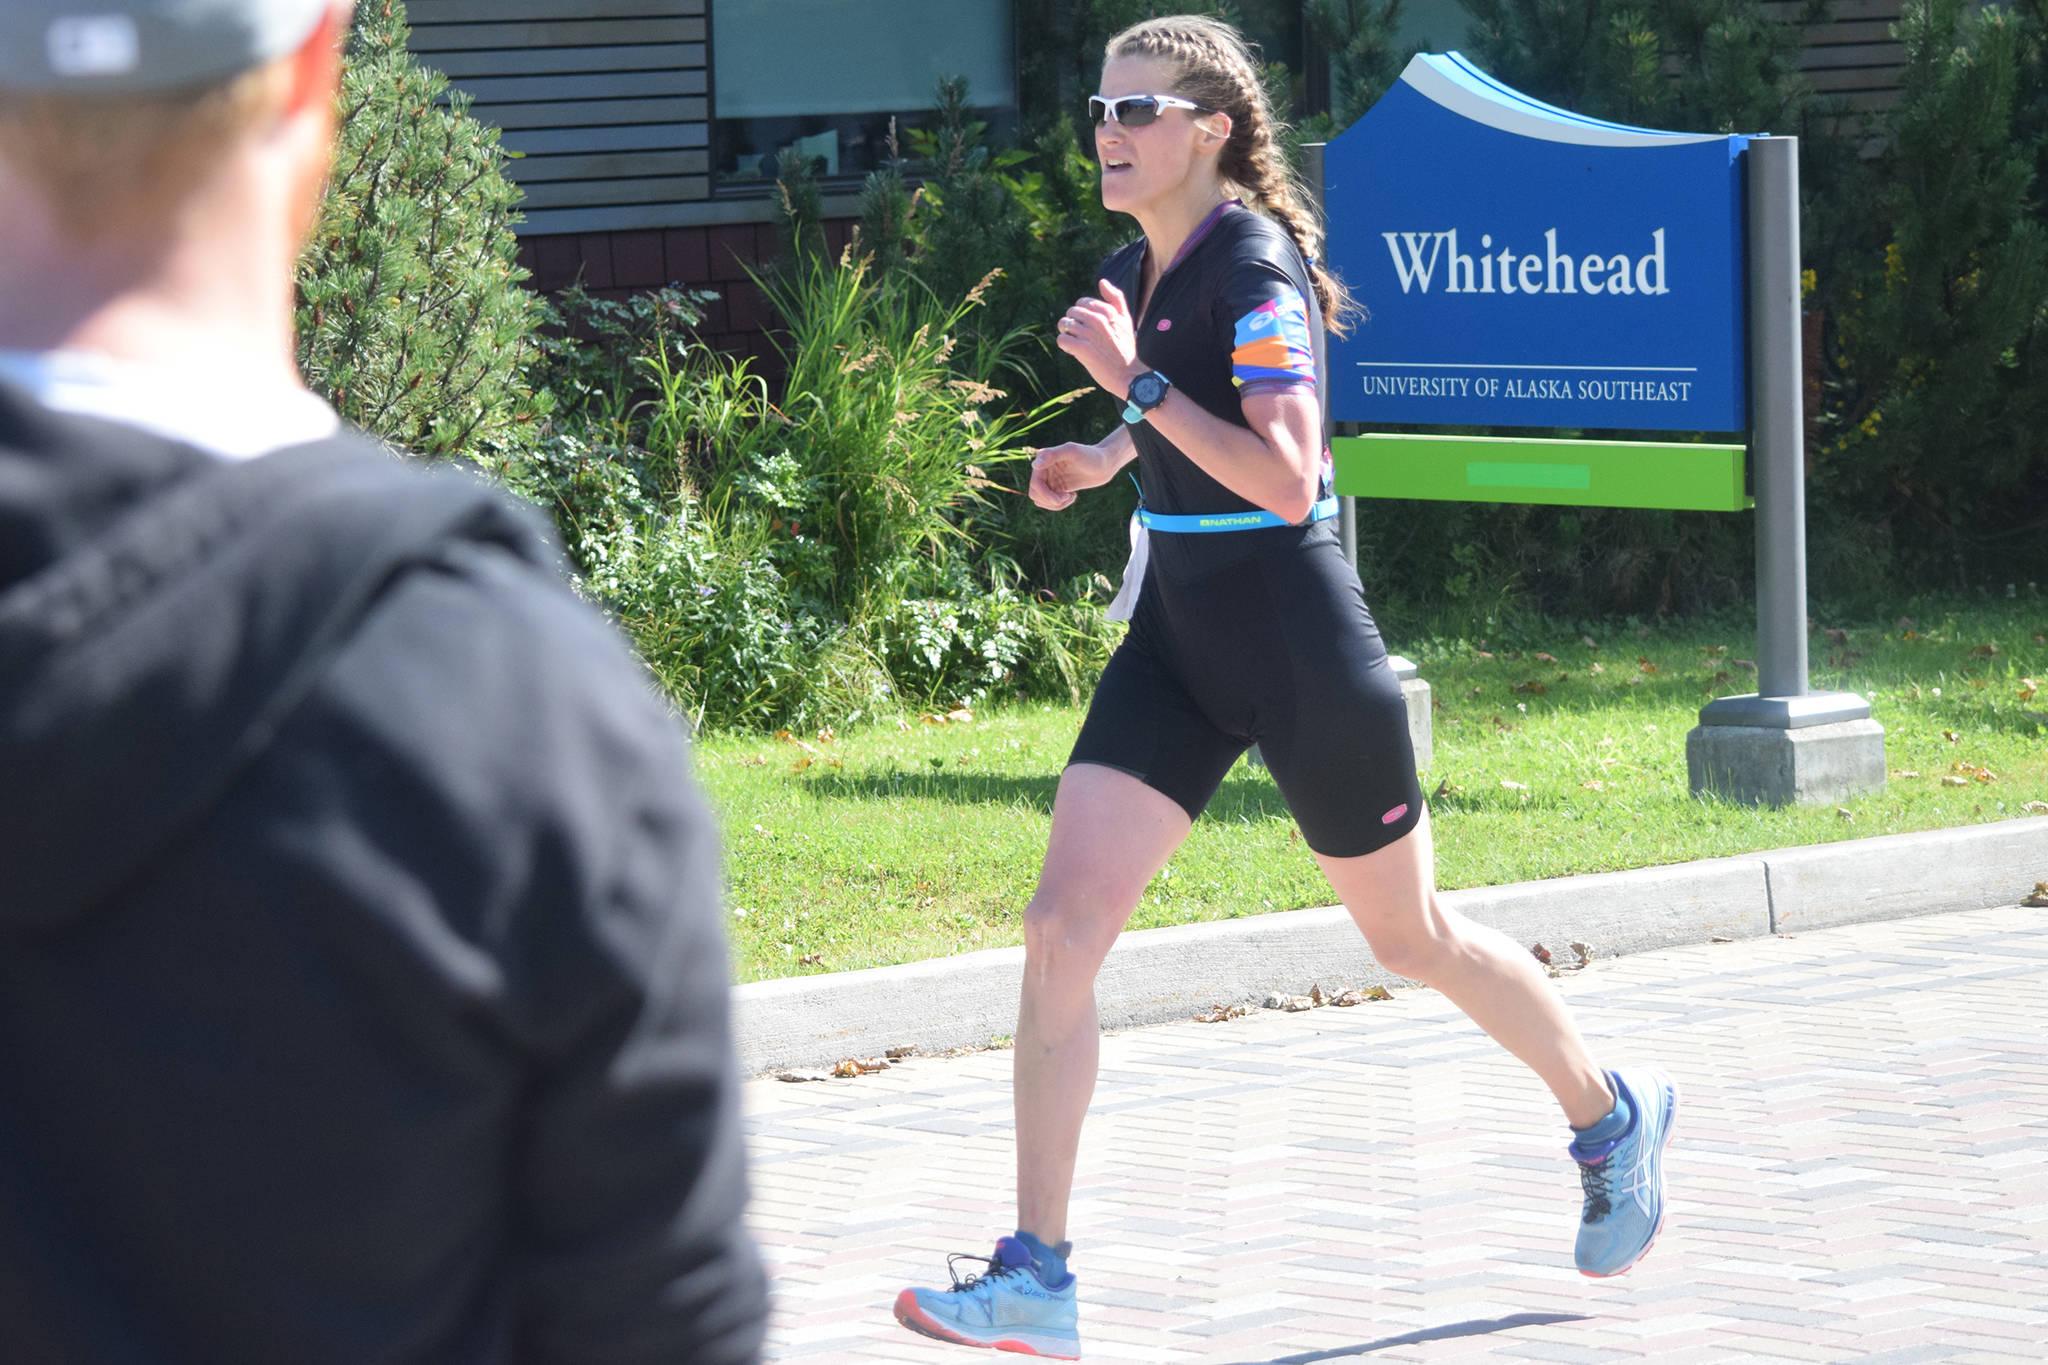 Eliza Dorn approaches the finish line while competing in 2019 Aukeman Triathon on Saturday, Aug. 3, 2019. Dorn and her her husband, Justin, won the men’s and women’s titles in the Aukeman’s Olympic distance race. (Nolin Ainsworth | Juneau Empire)